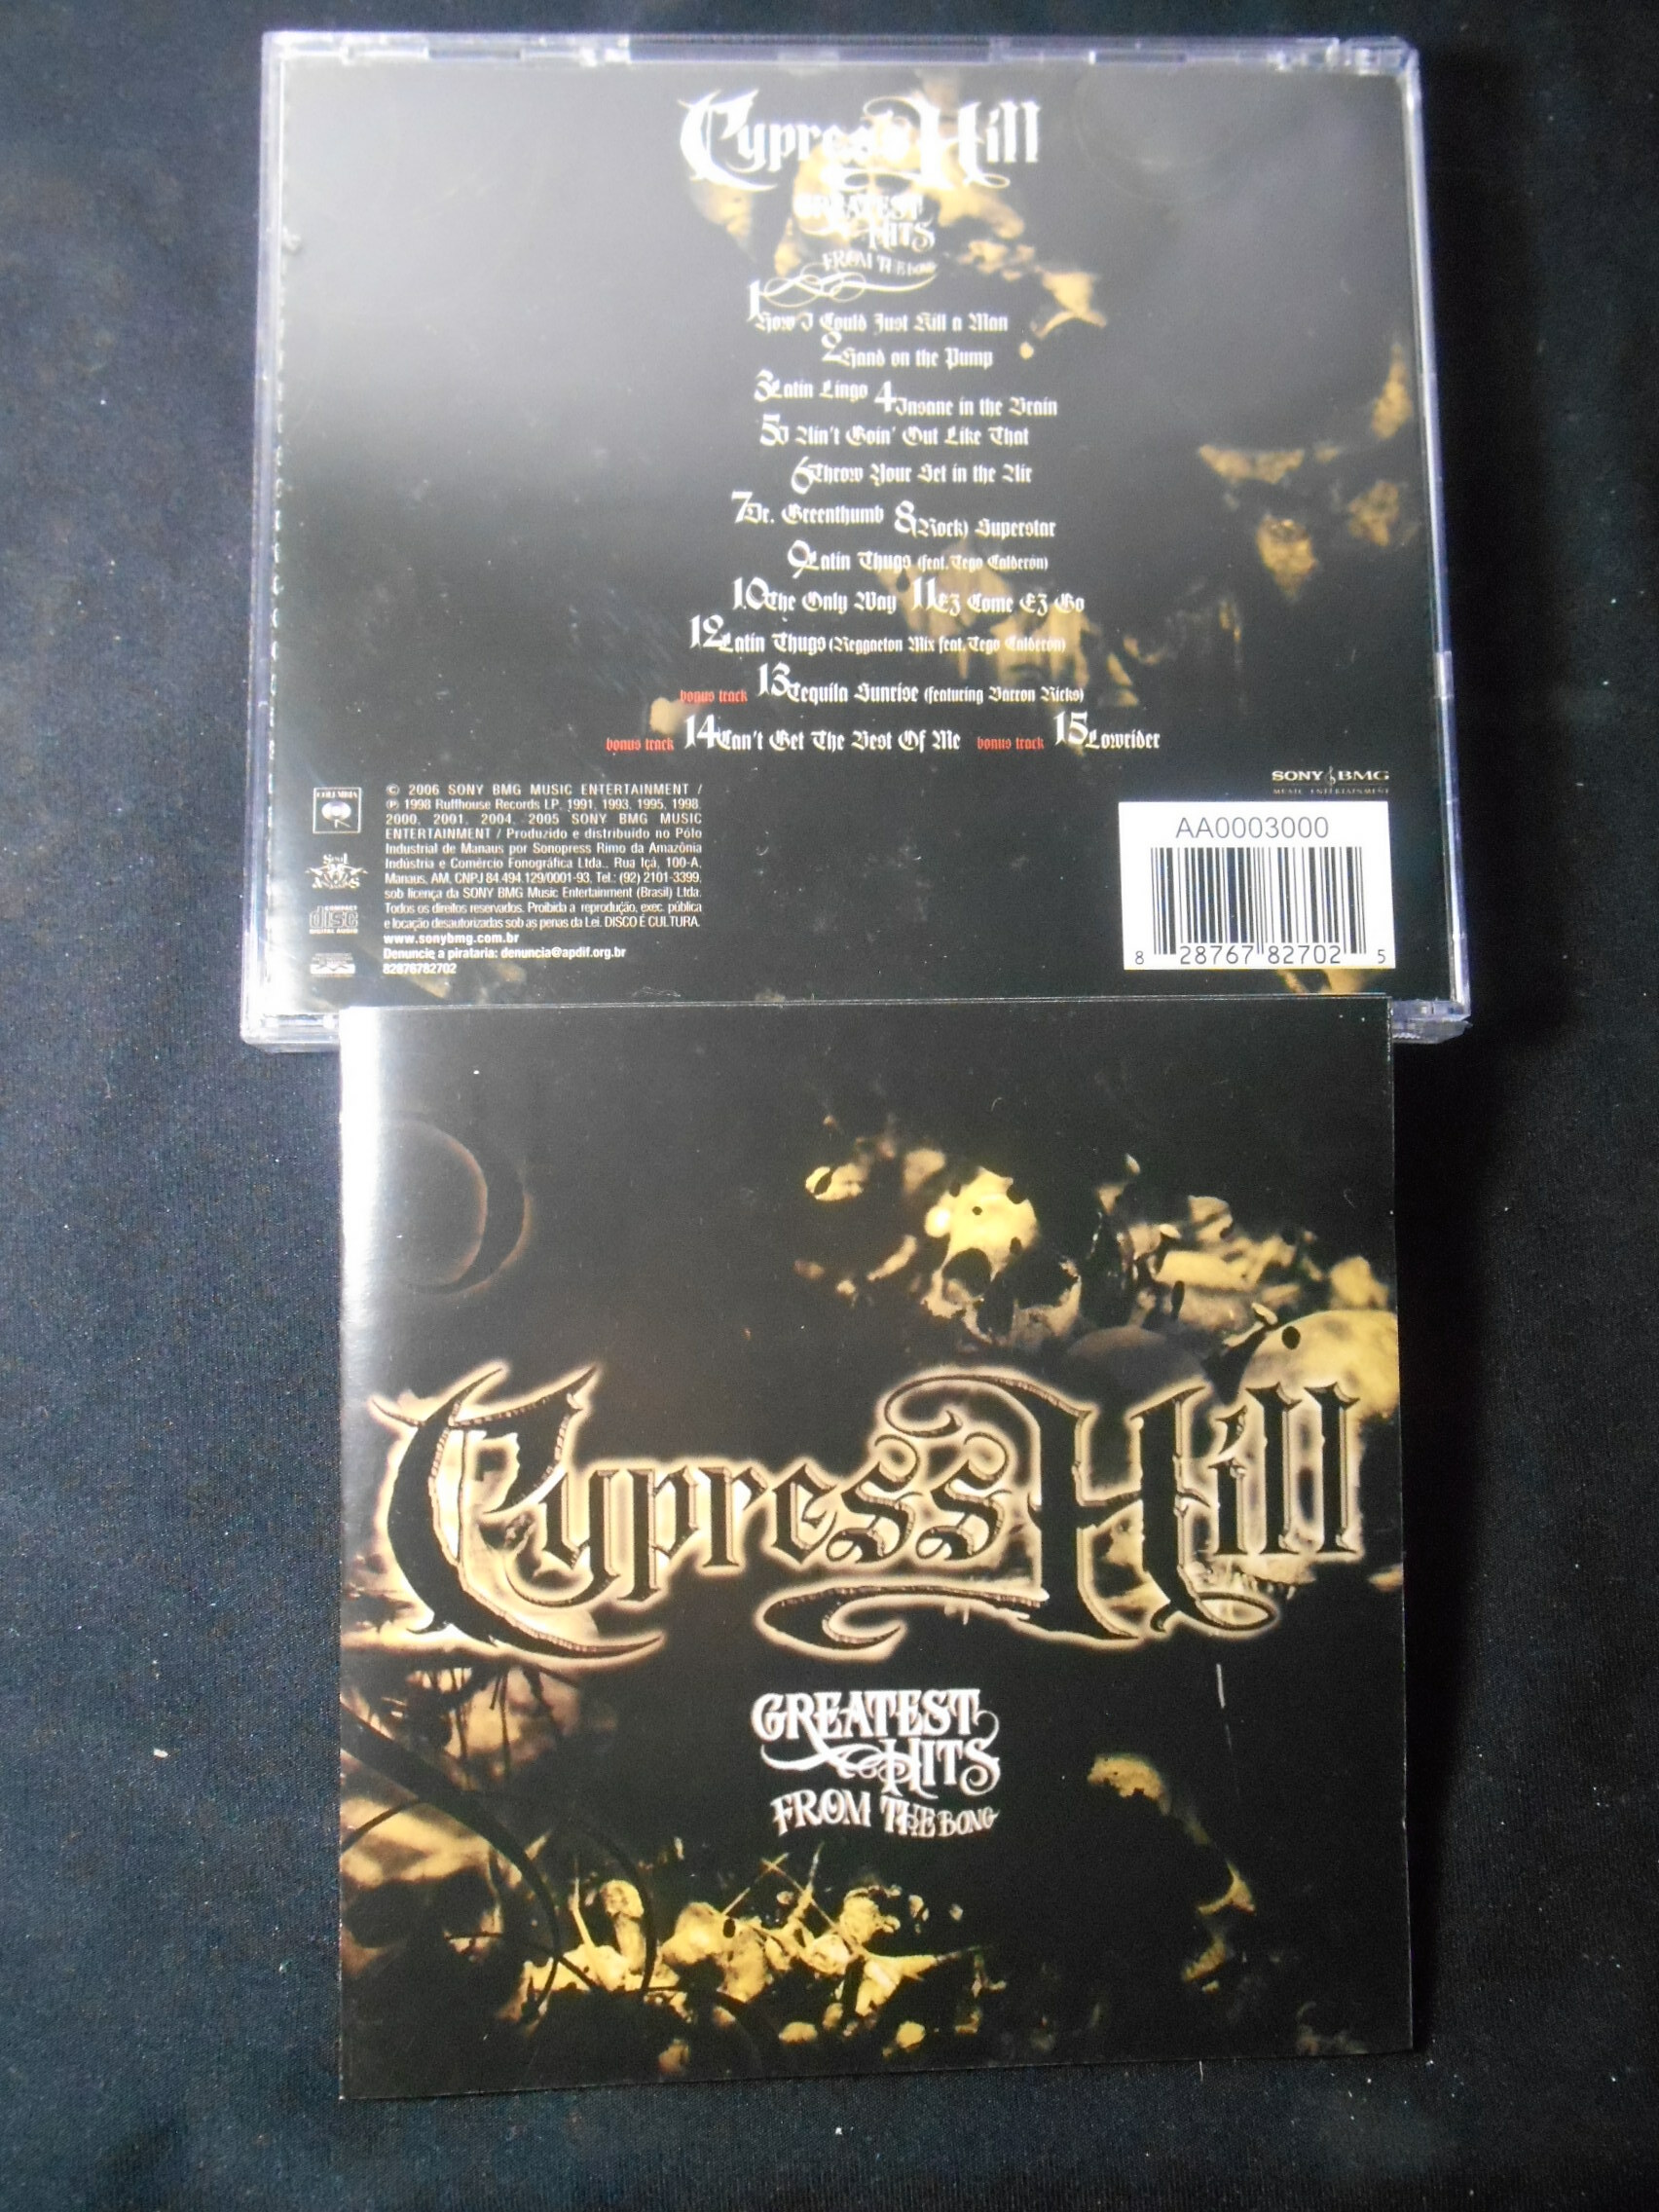 CD - Cypress Hill - Greatest Hits from the Bong